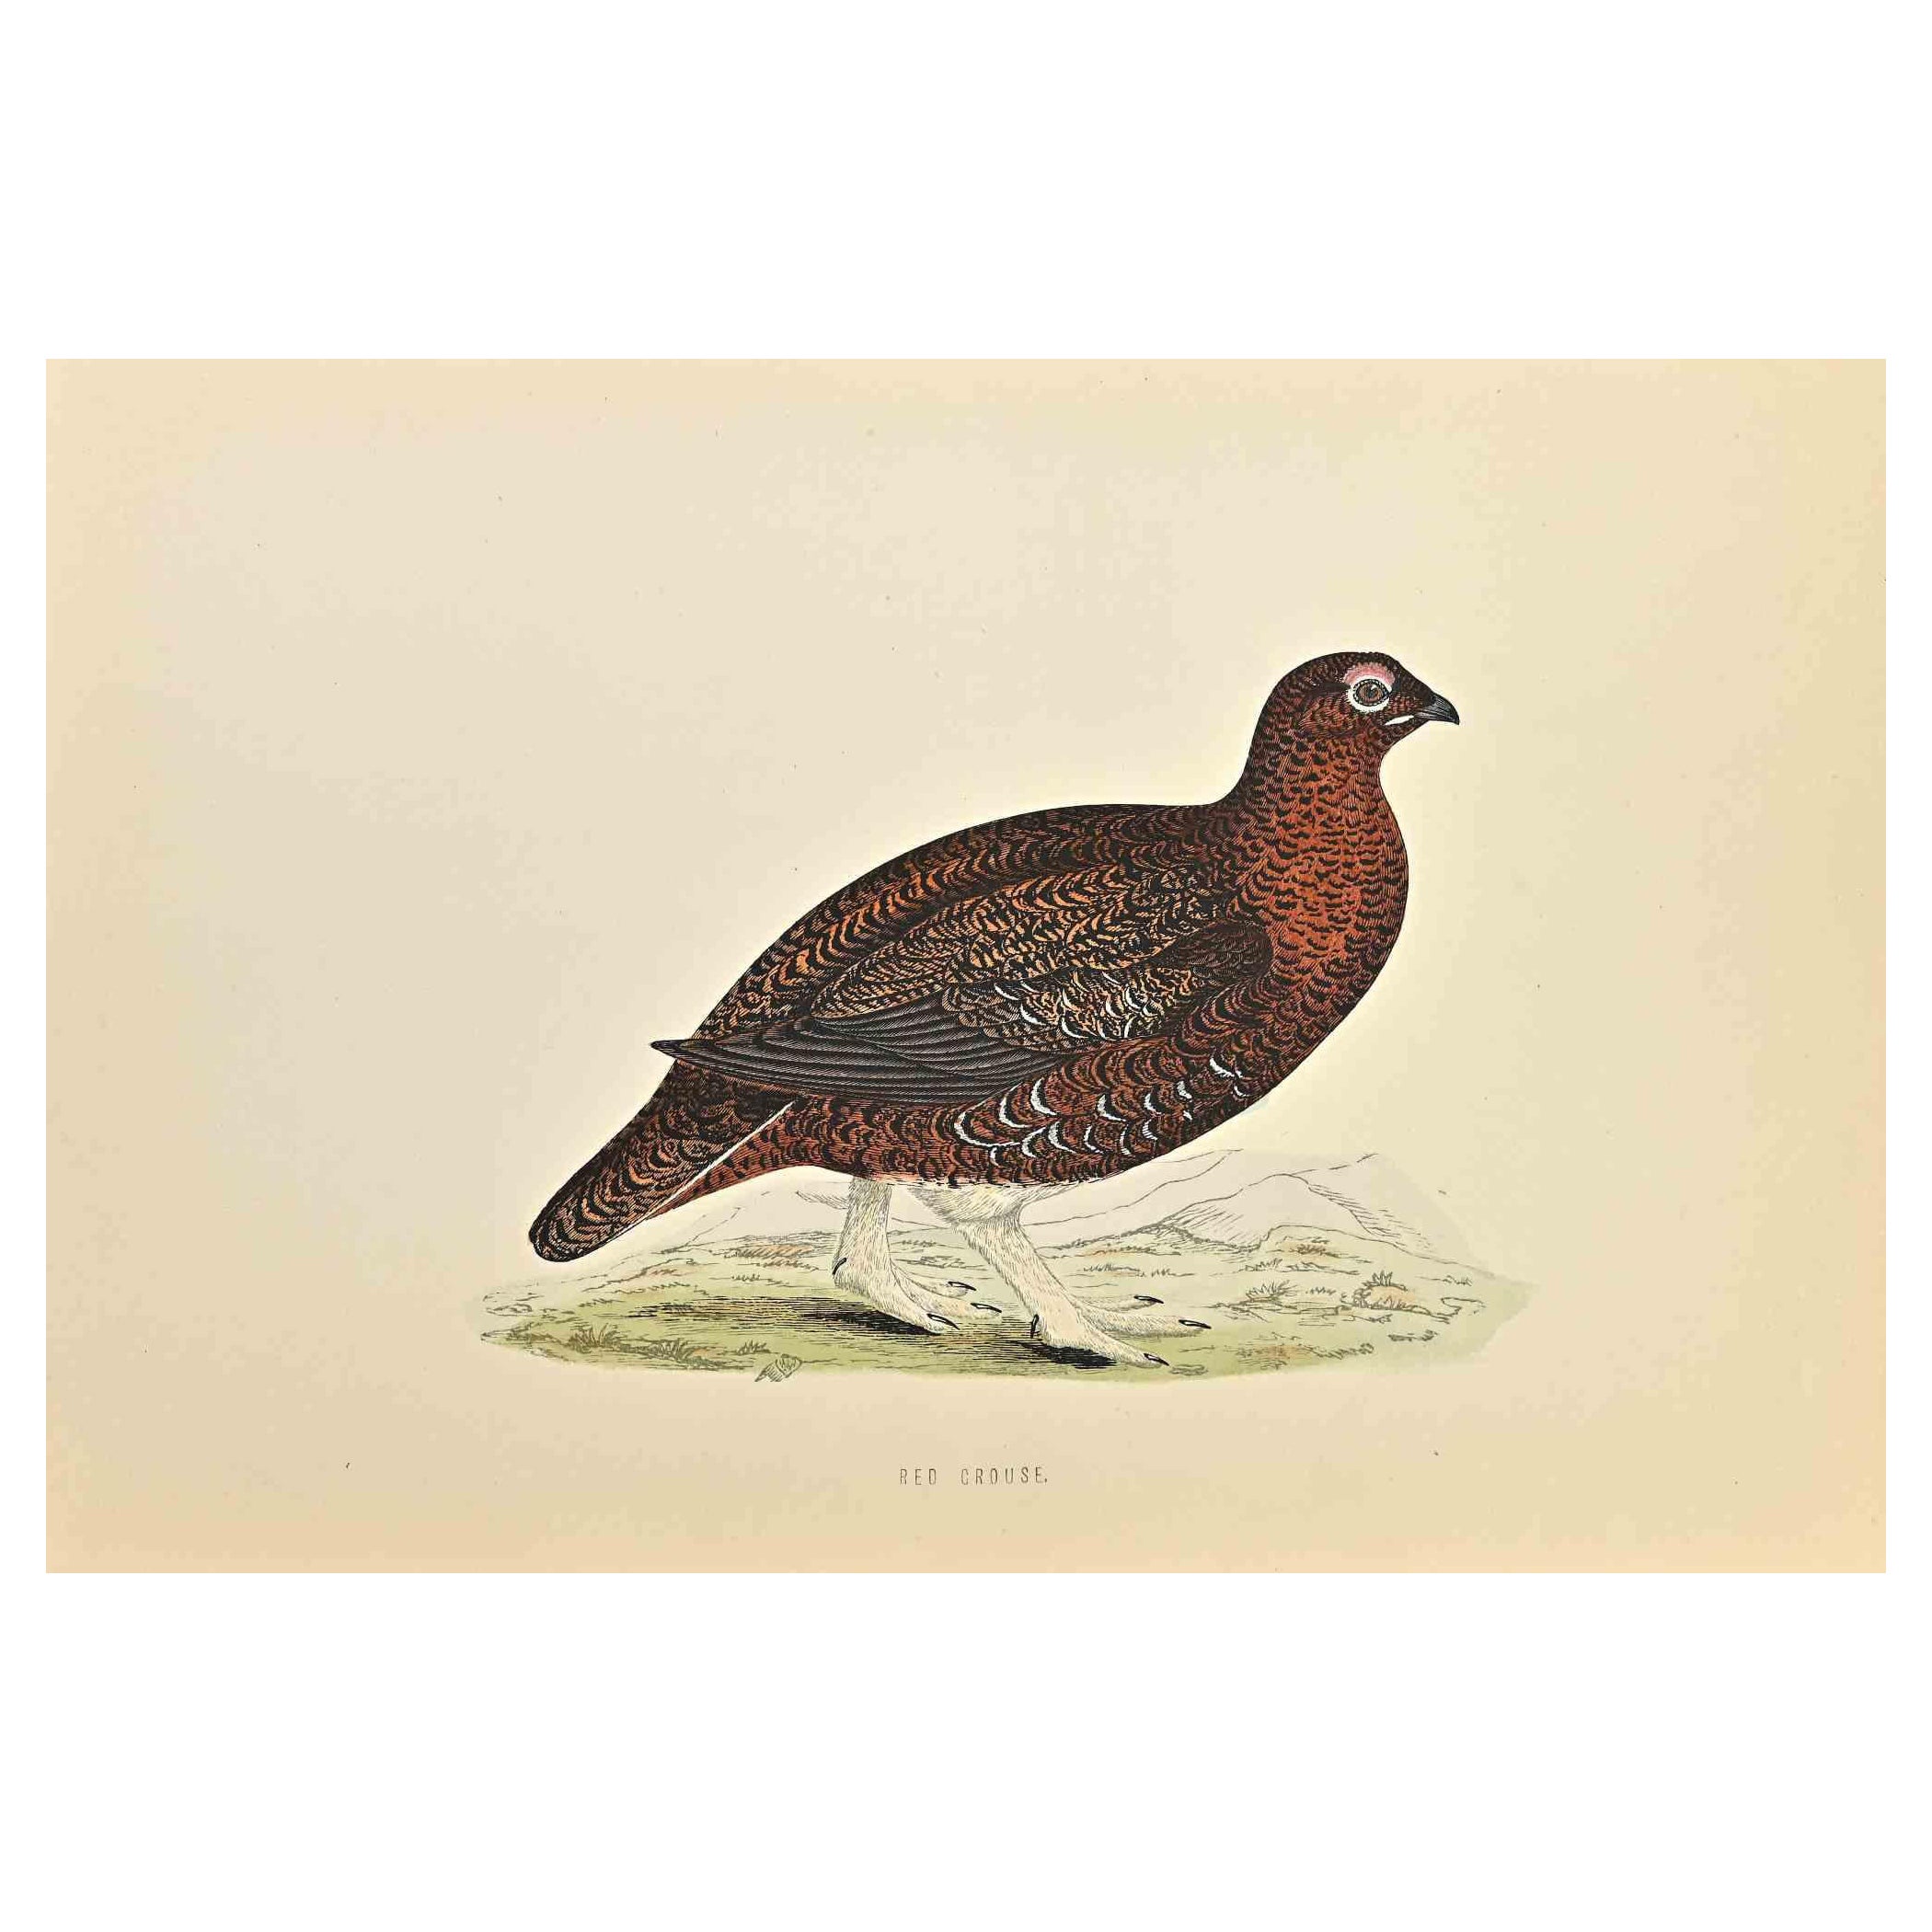 Red Grouse - Woodcut Print by Alexander Francis Lydon  - 1870